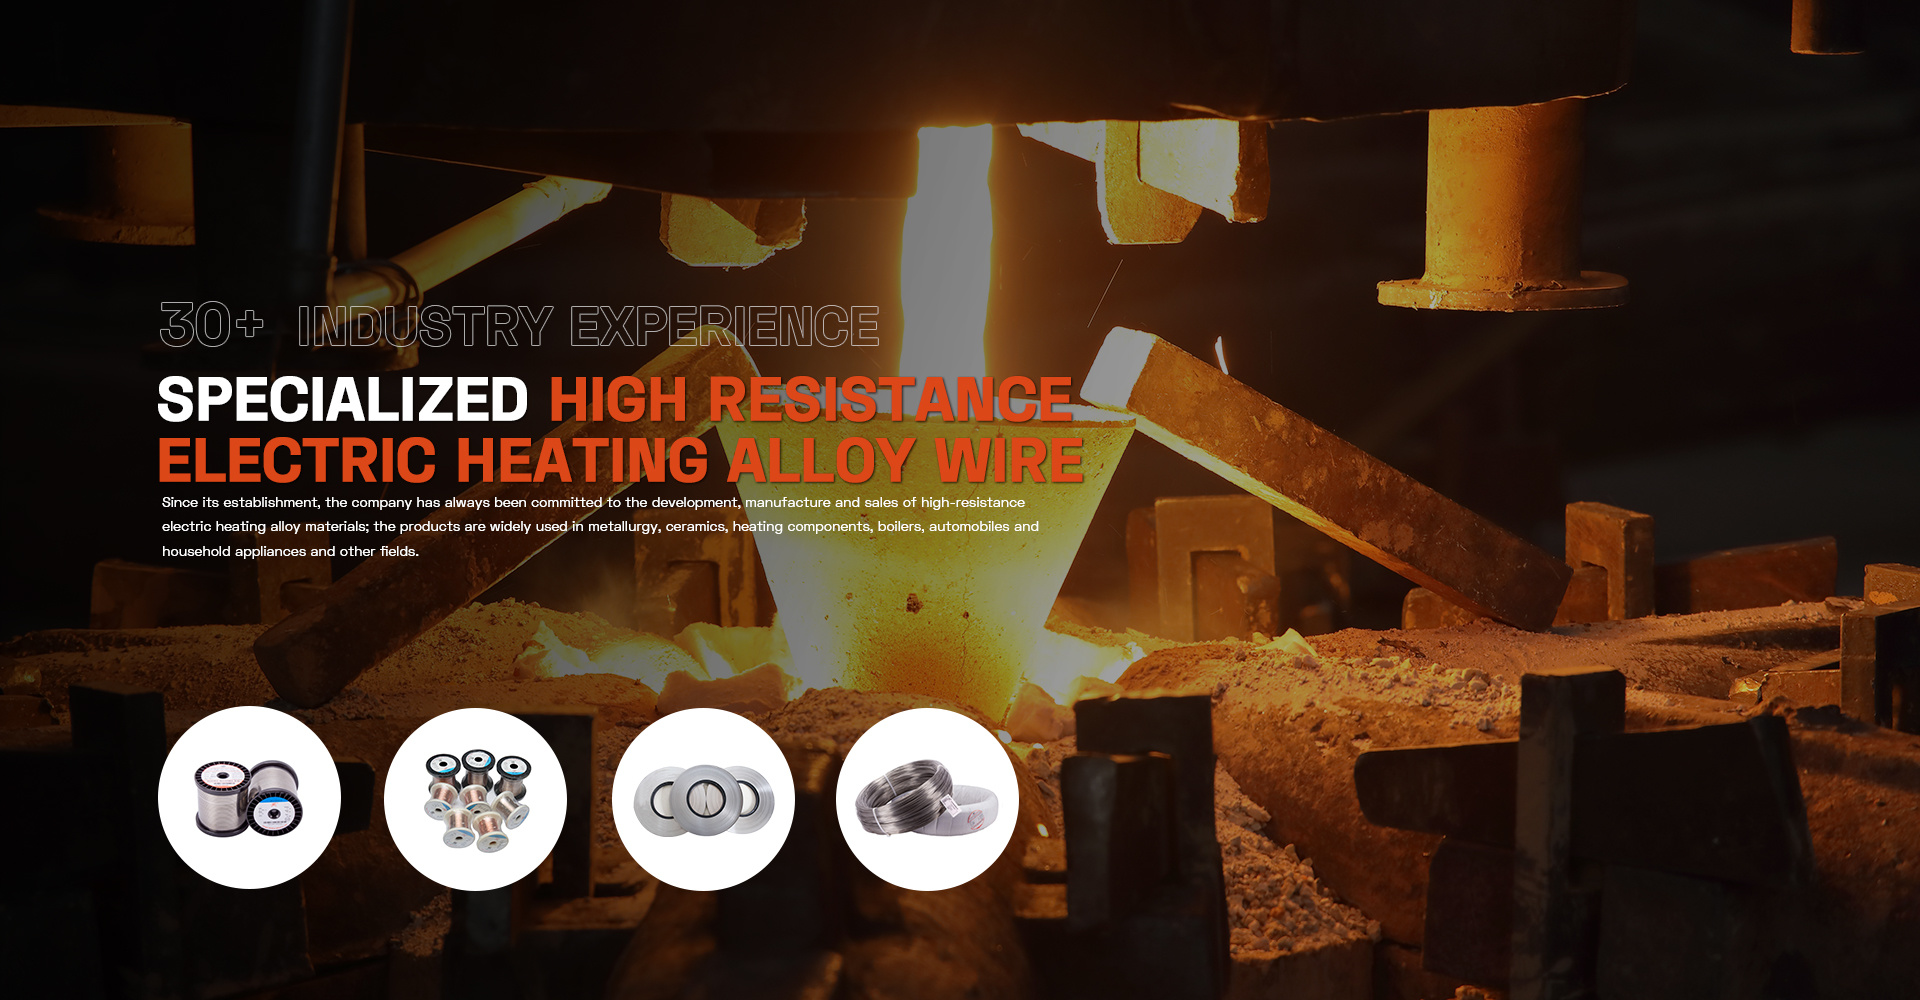 Committed to the development, manufacture and sales of high resistance electric heating alloy materials